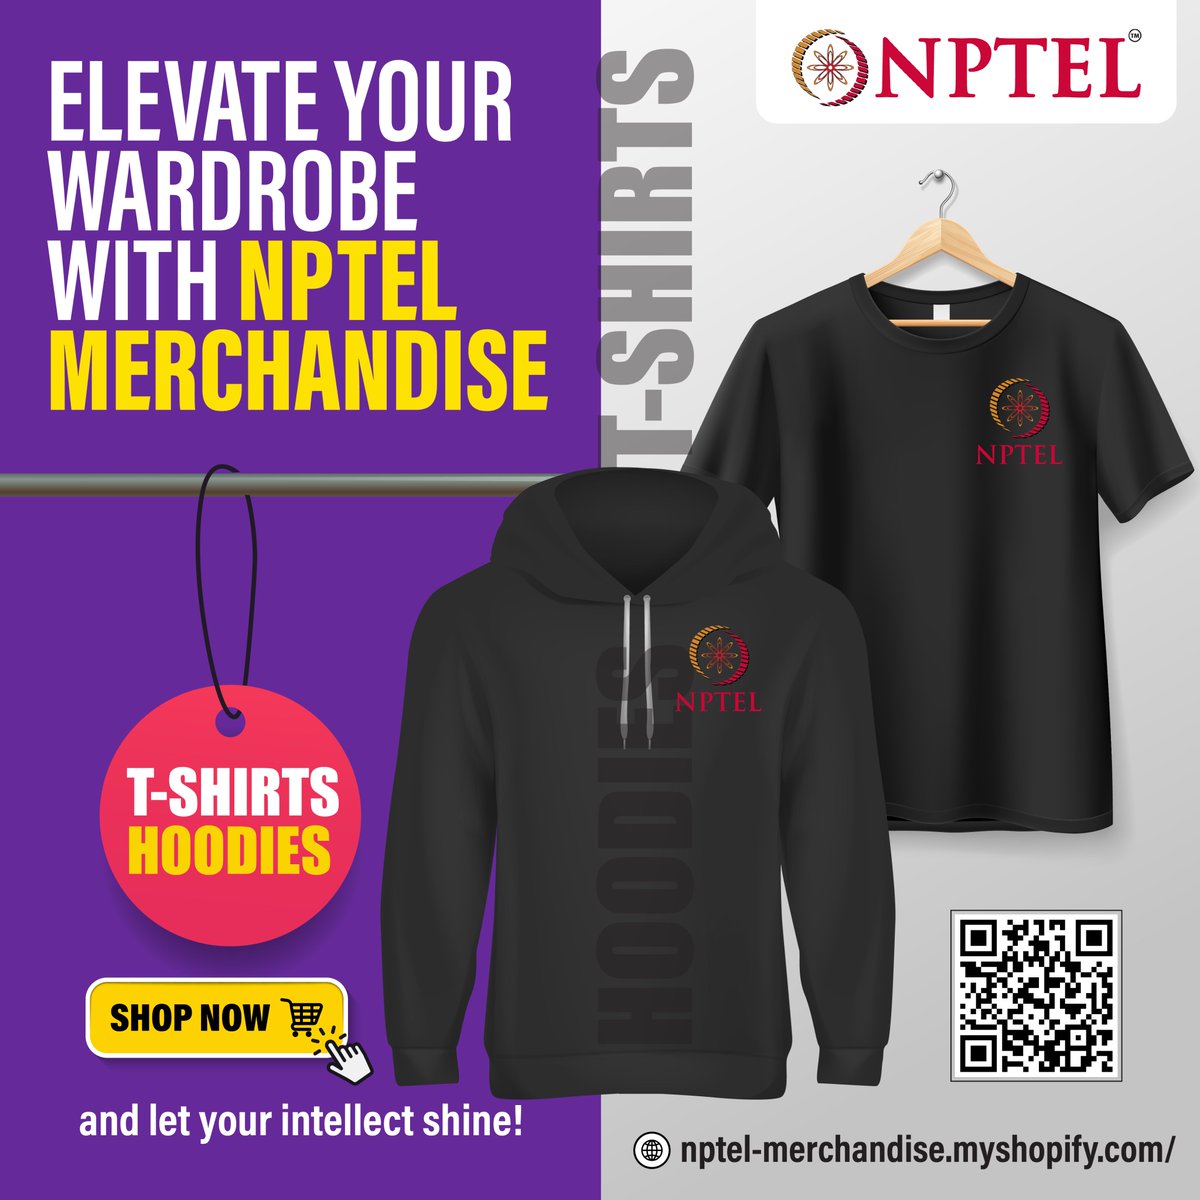 Gear Up Your Style and Knowledge with NPTEL Merchandise Show off your enthusiasm and appreciation for this incredible online education platform with our exclusive NPTEL T-shirts and hoodies! Shop today - nptel-merchandise.myshopify.com #testimonial #hoodie #goodie #merchandise